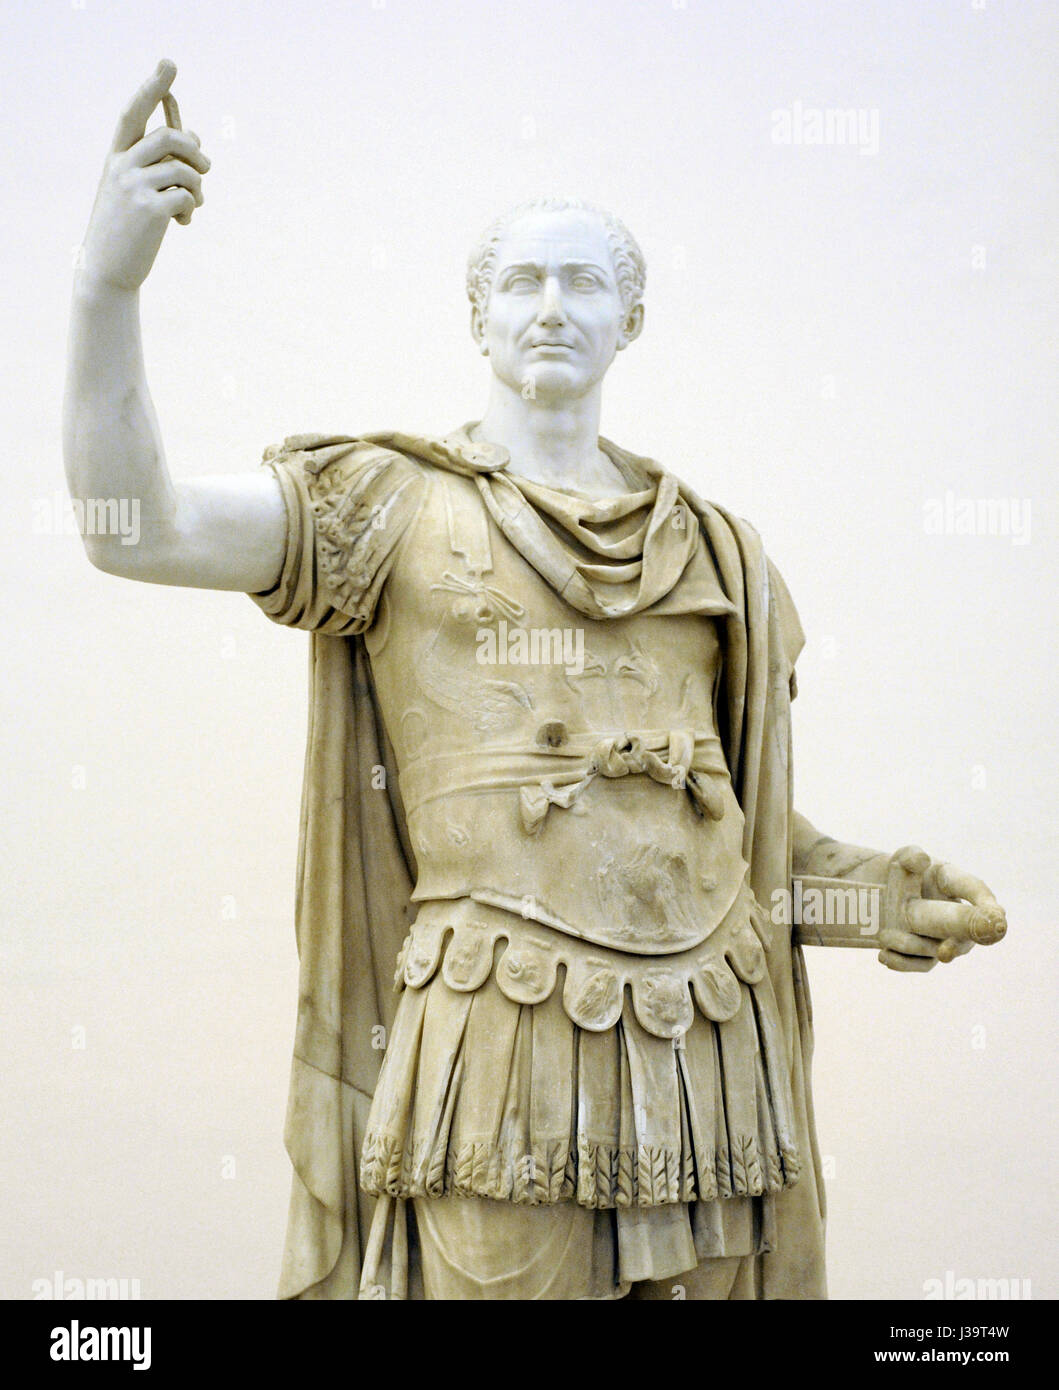 Figure in miliary uniform, with a modern head of Julius Caesar. Antonine-Severan (late 2nd-early 3rd century AD). National Arhaeological Museum. Naples. Italy. Stock Photo